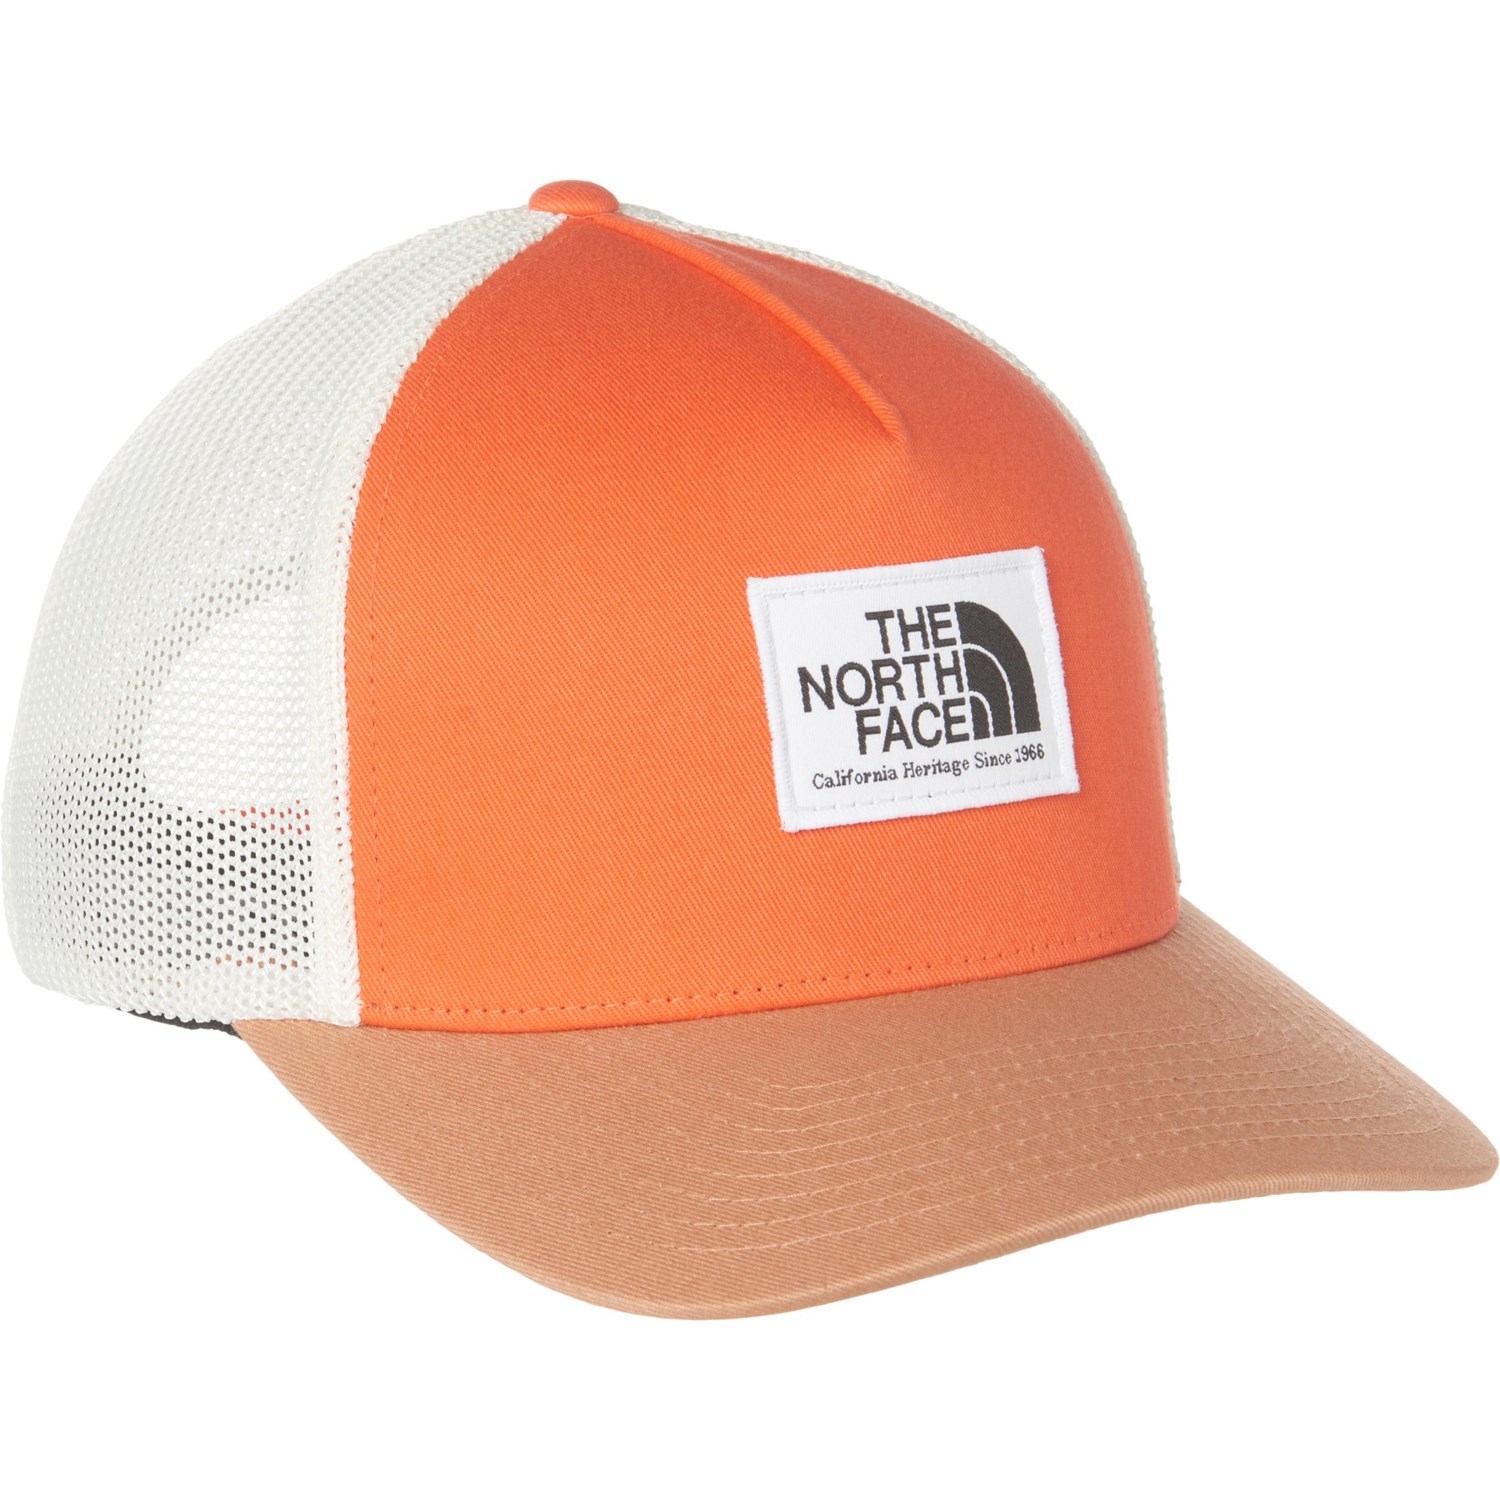 The North Face Keep It Patched Structured Trucker Hat